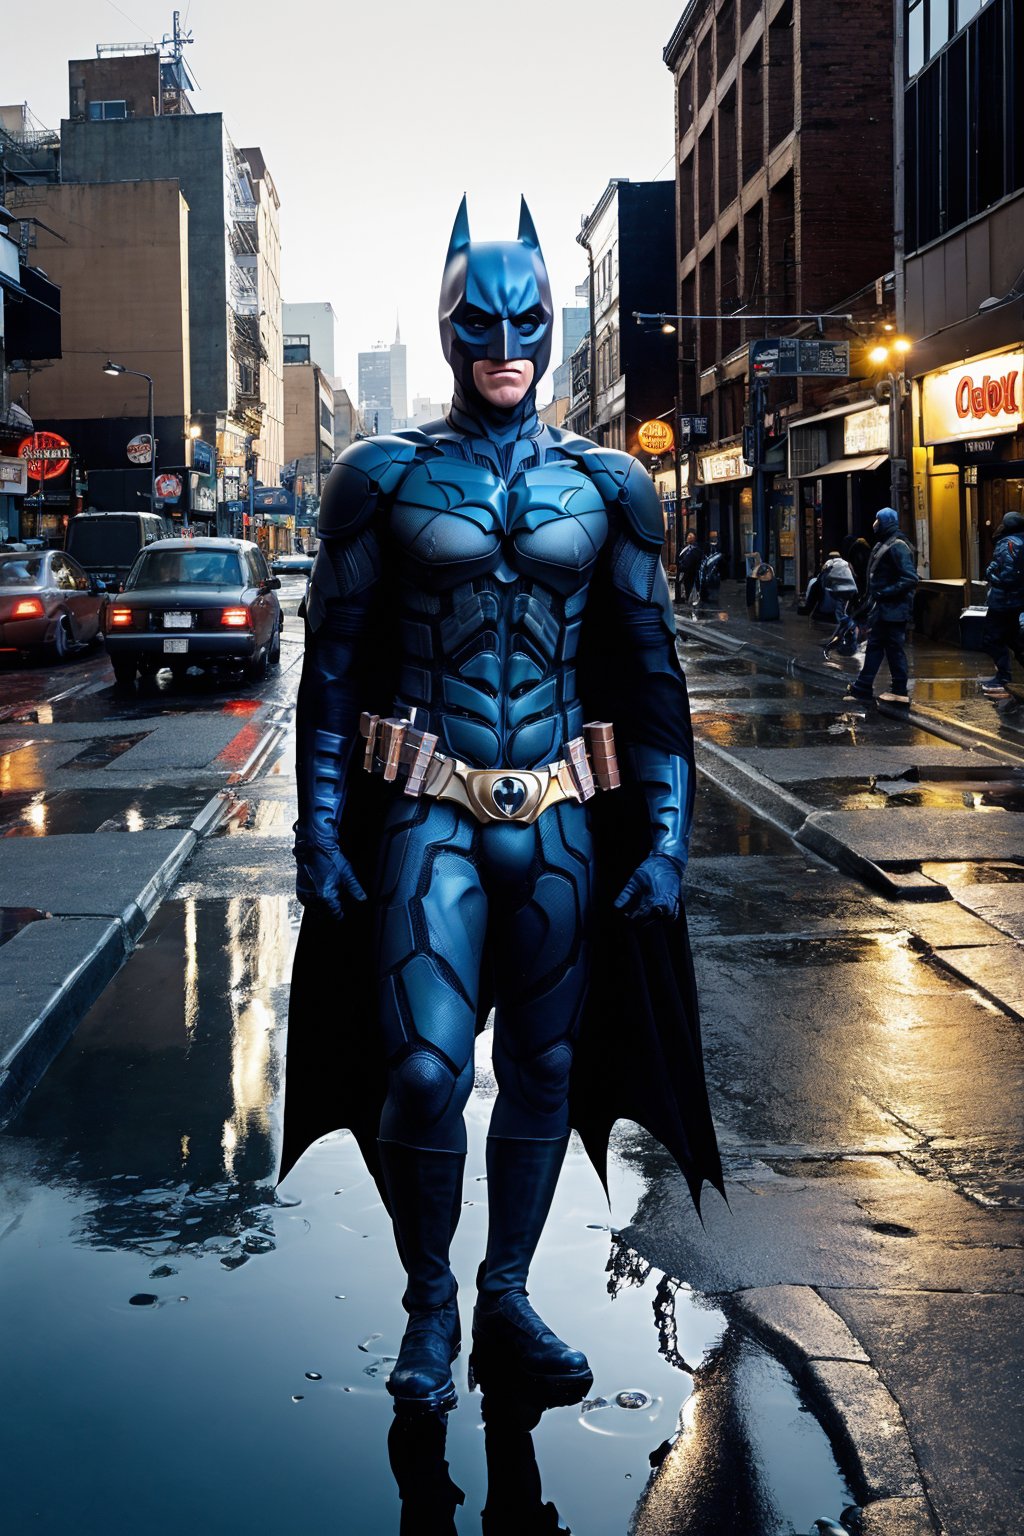 (masterpiece), (best quality), 1boy, Batmancb, looking at viewer, mask, bodysuit, belt, cape, gloves, realistic,Masterpiece, city, night, 4k, 8k, highres, detailed buildings, shining lights, neon signs, vibrant colors, evocative shadows, reflection in puddles, contrast, architecture details, moonlit sky, realistic textures, city lights reflecting on wet streets